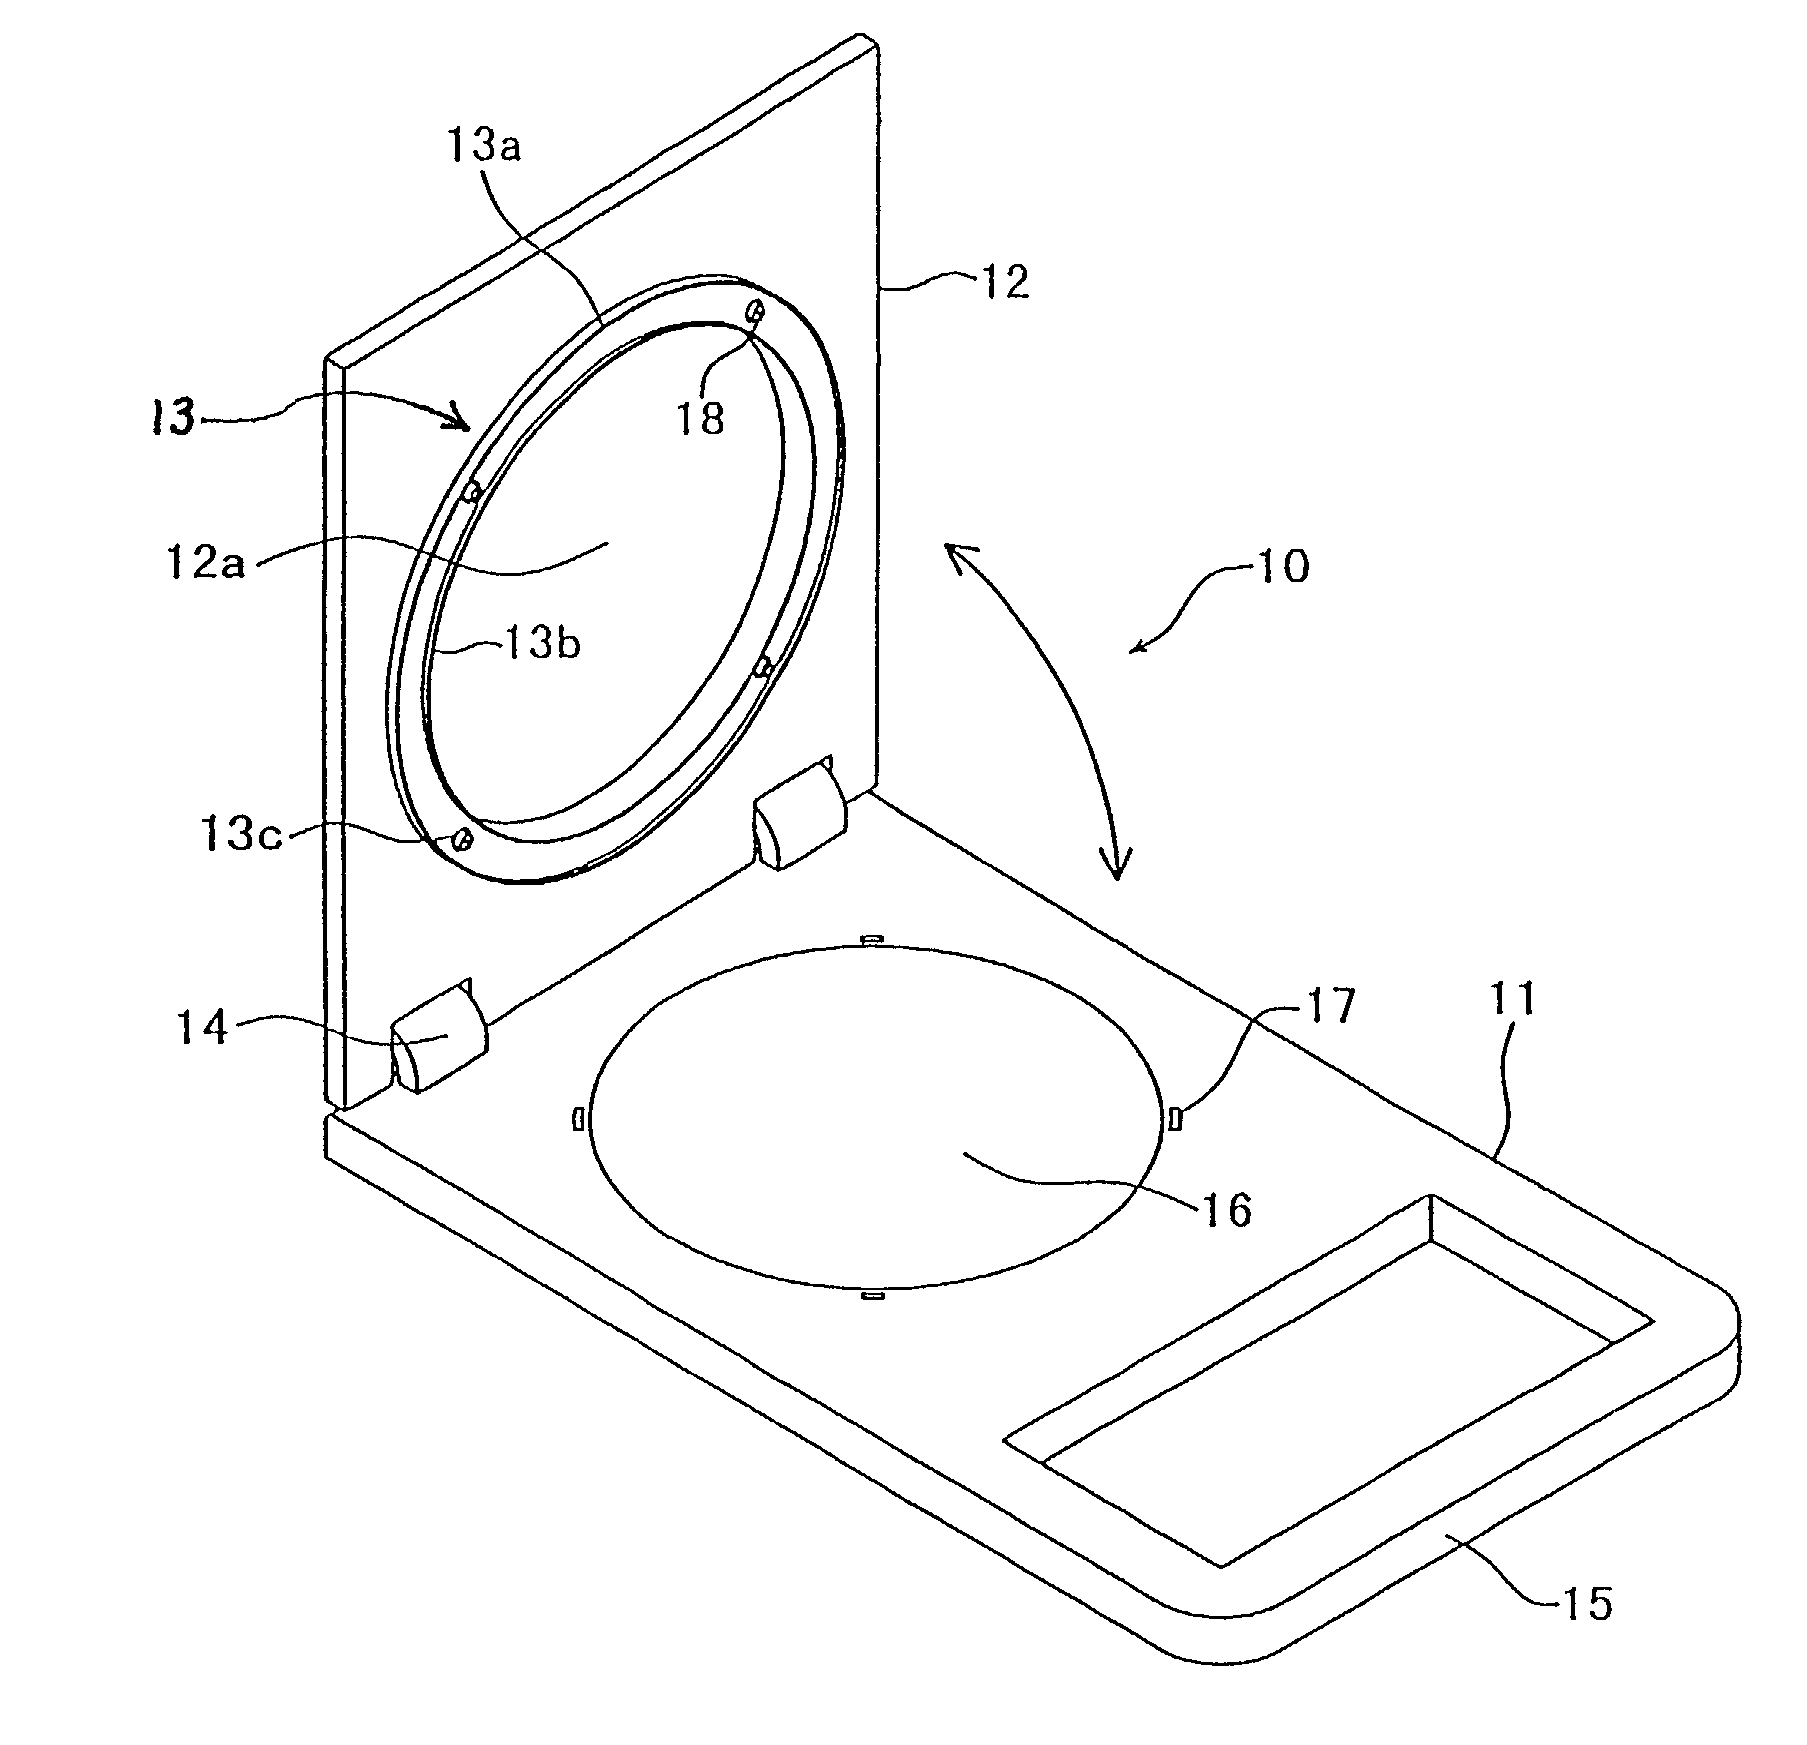 Semiconductor wafer holder and electroplating system for plating a semiconductor wafer